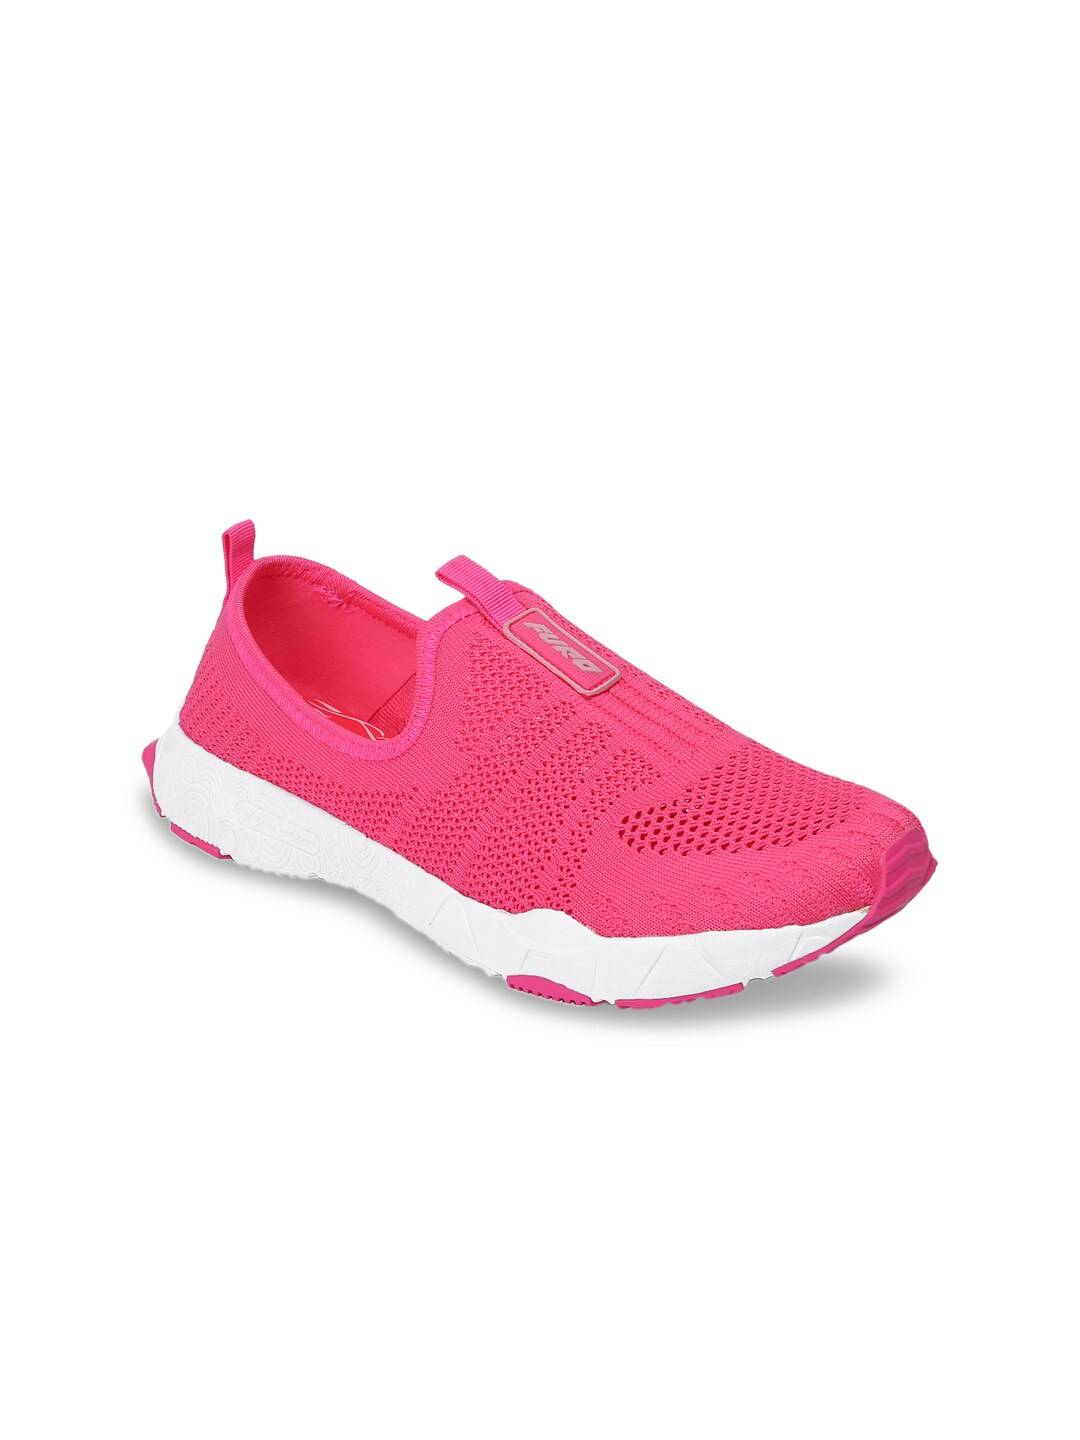 FURO by Red Chief Women Pink Mesh Mid-Top Running Shoes Price in India